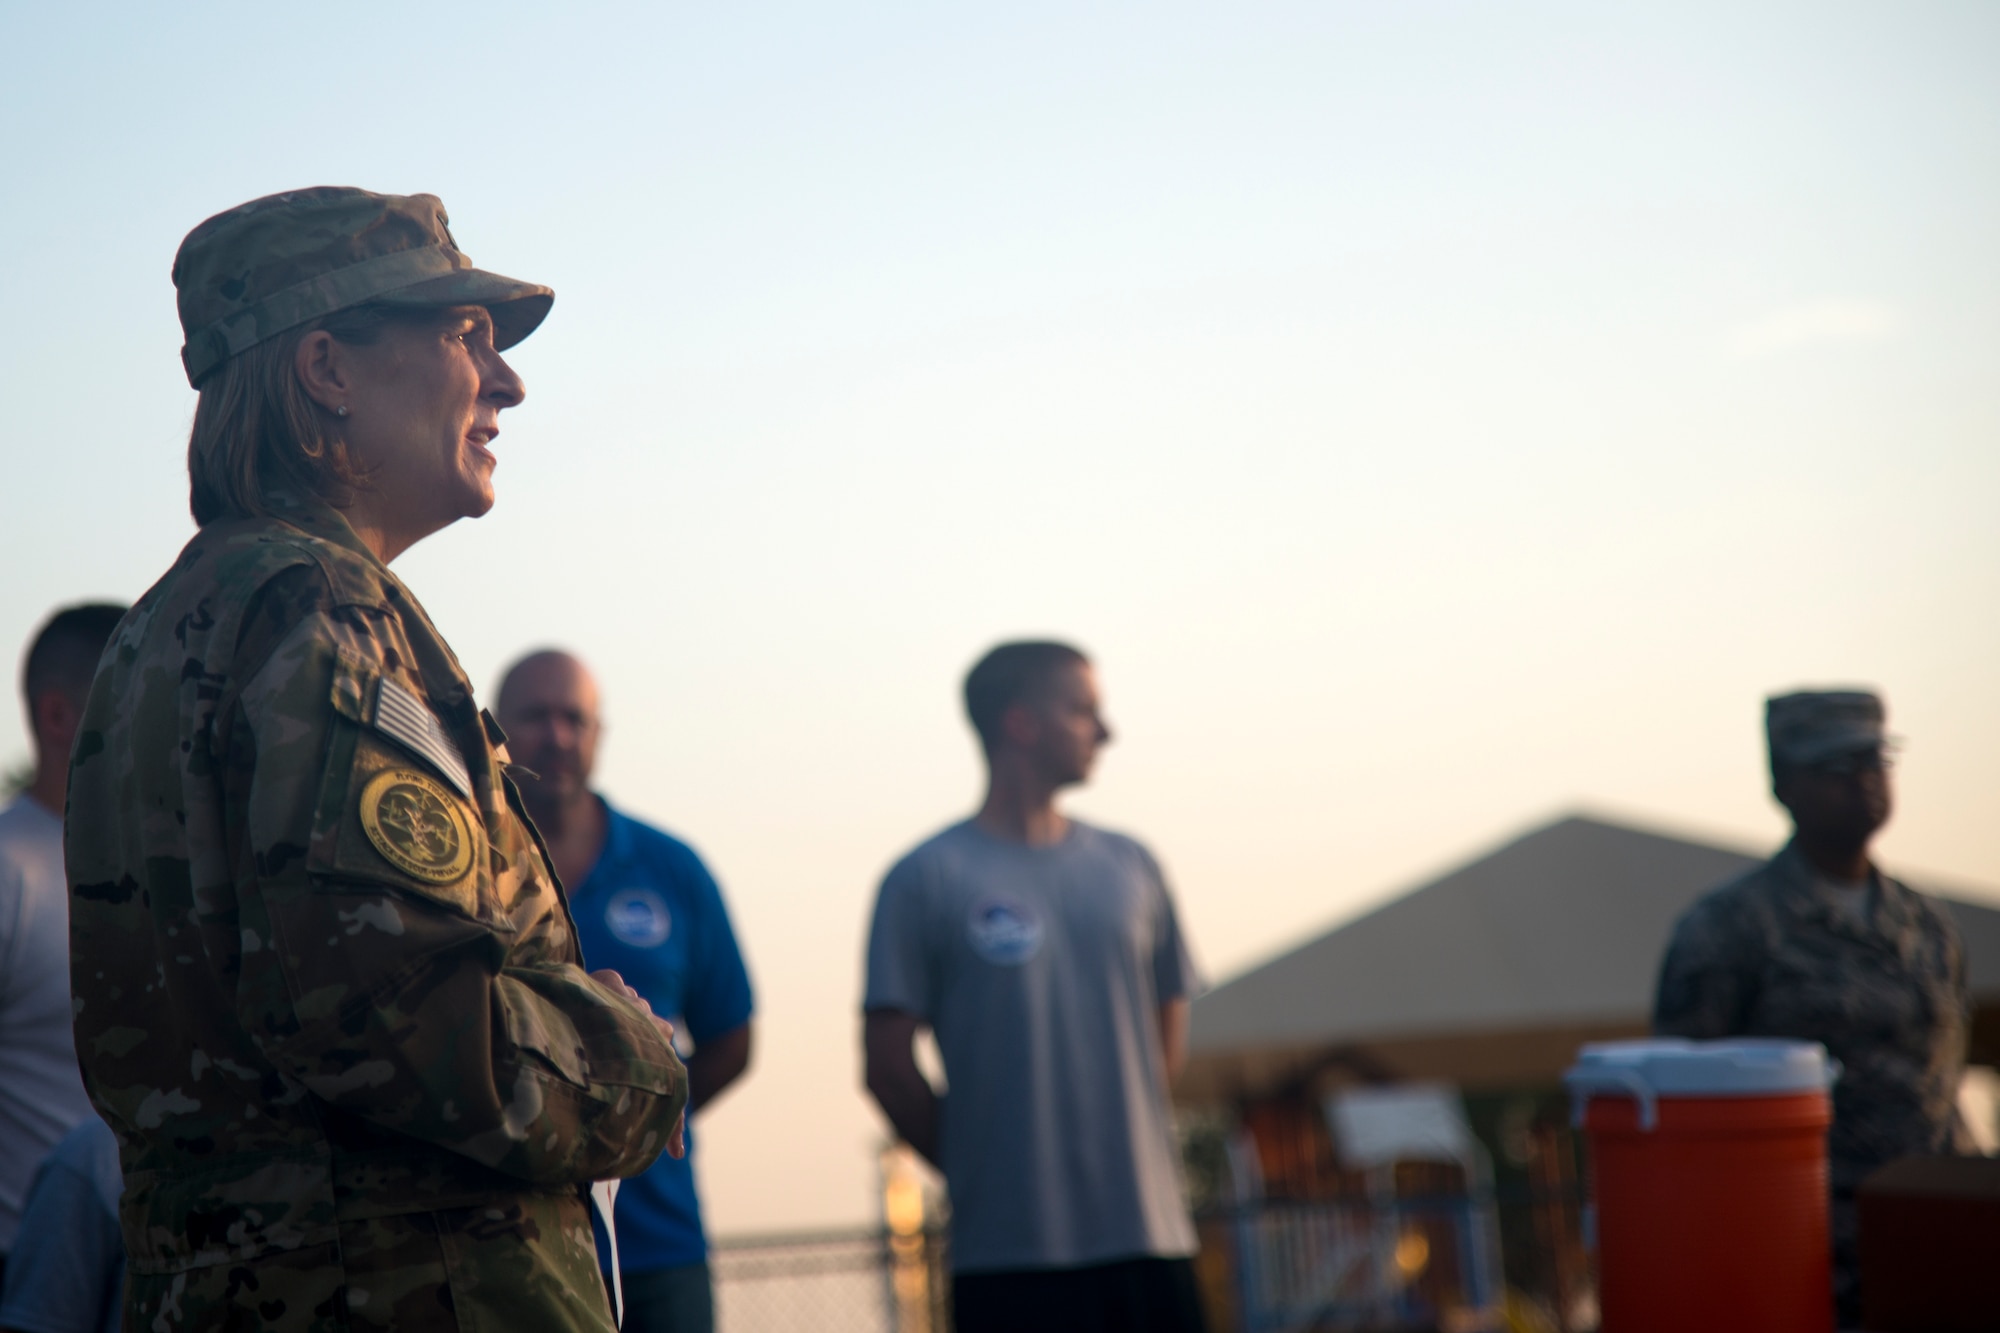 U.S. Air Force Col. Jennifer Short, 23d Wing commander, gives opening remarks before the start of the National Preparedness Month 5k fun run, Sept. 1, 2017, at Moody Air Force Base, Ga. “Our goal is to make sure everyone is ready,” said Short. “Disasters don’t plan ahead, but you can.” (U.S. Air Force photo by Airman 1st Class Erick Requadt)